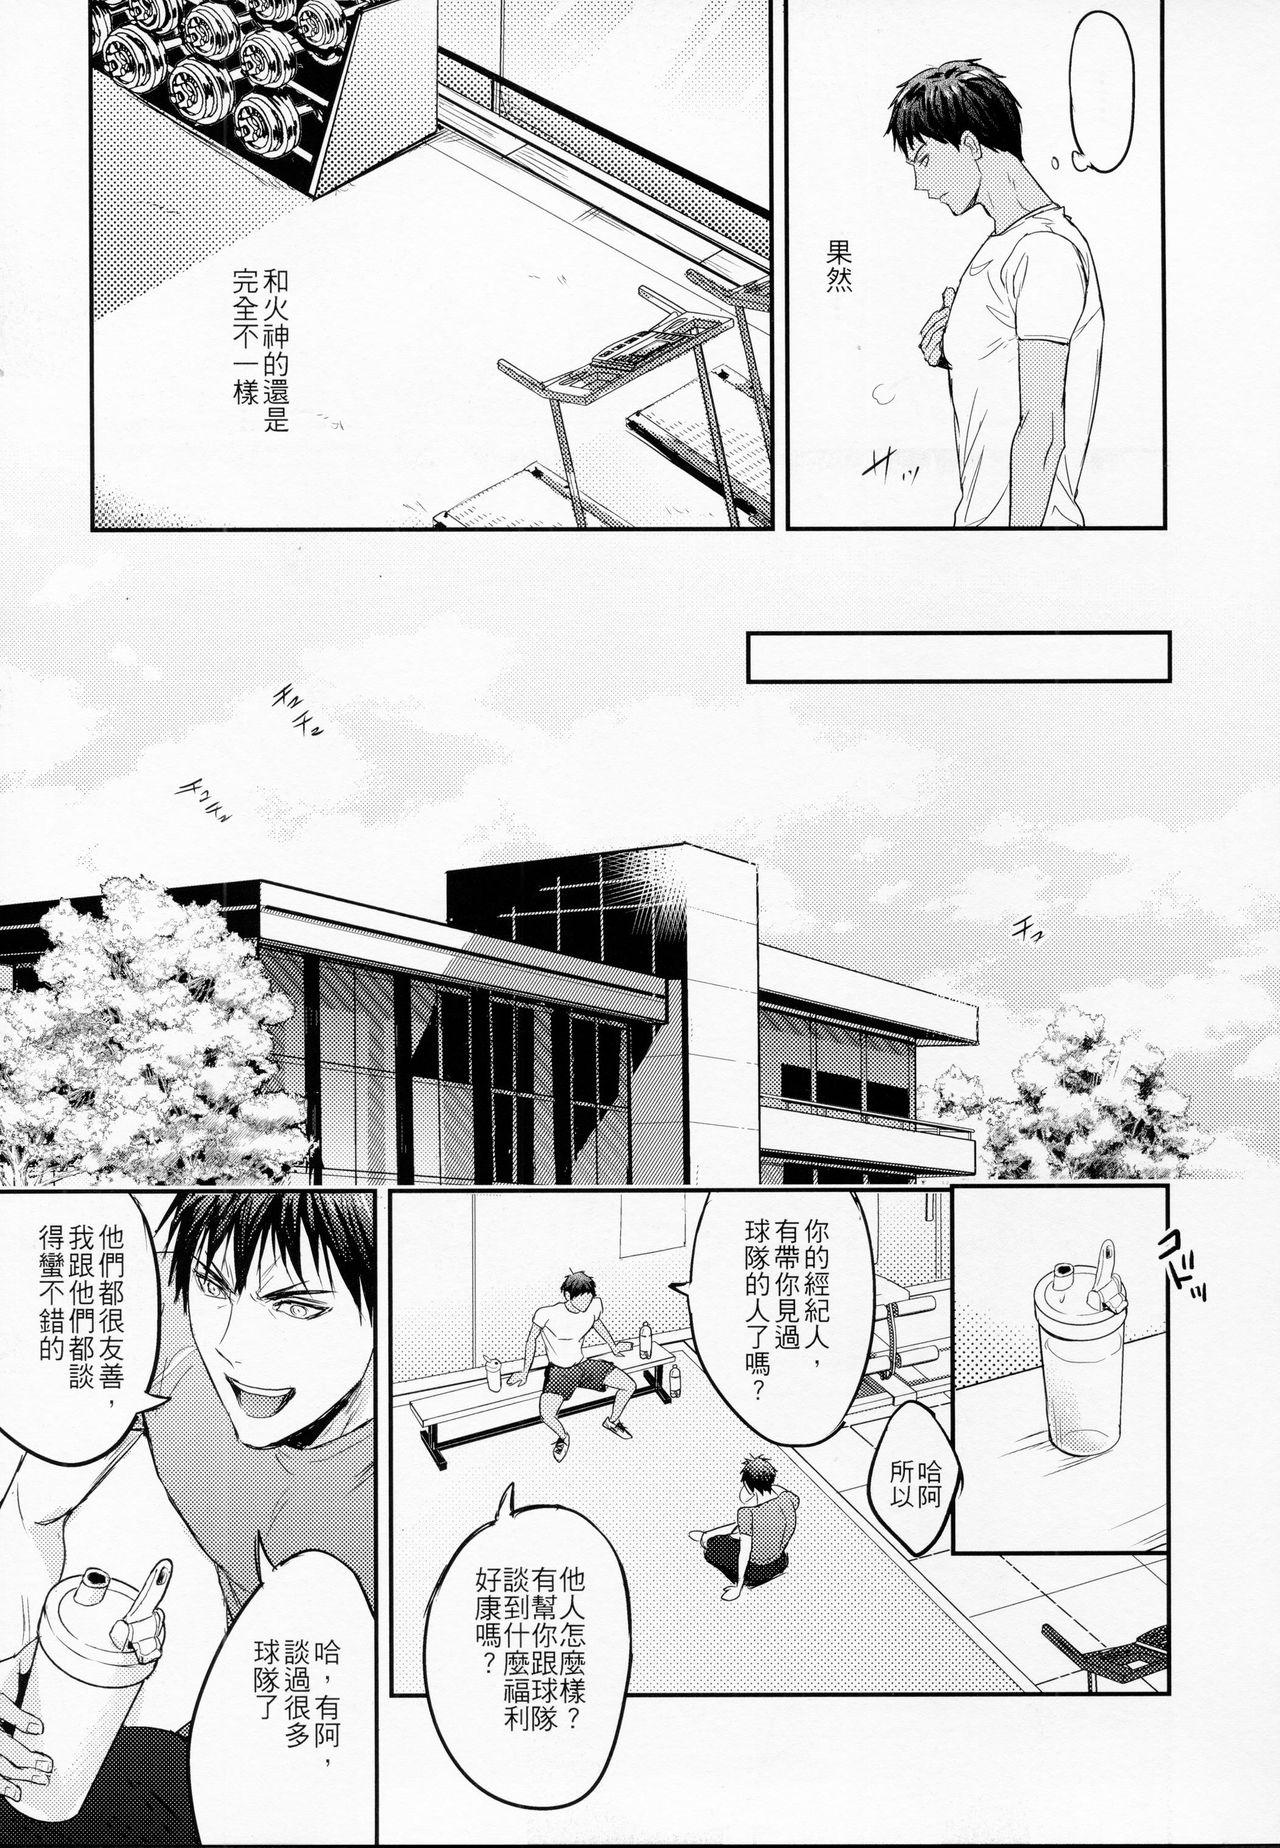 Cdzinha This is how we WORK IT OUT - Kuroko no basuke Double - Page 6